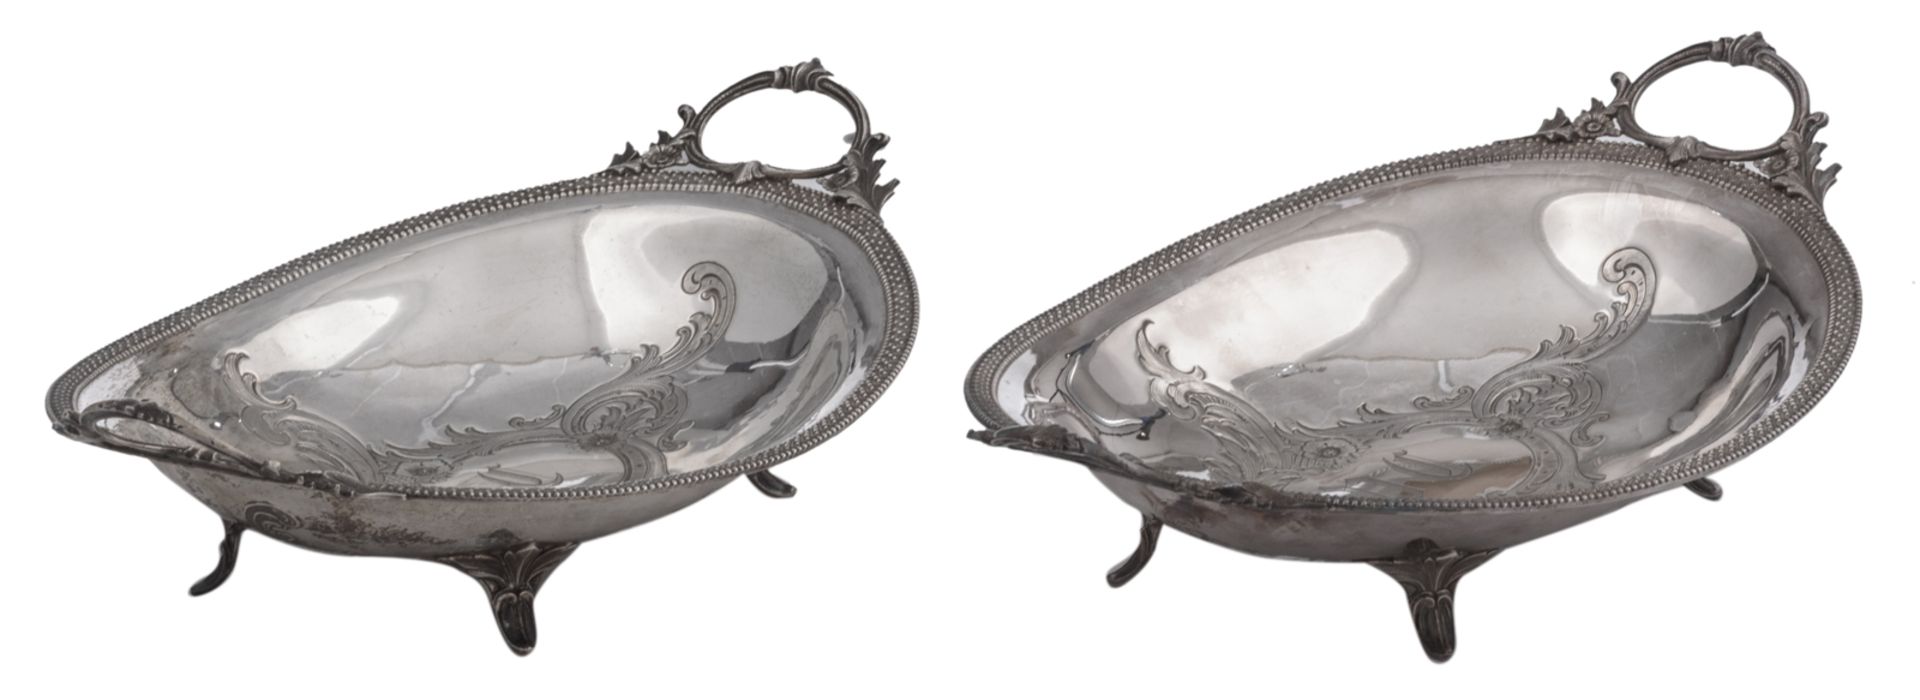 A pair of 19thC Rococo Revival silver vegetable dishes, Austro Hungarian, 13 lothige 812/000, with a